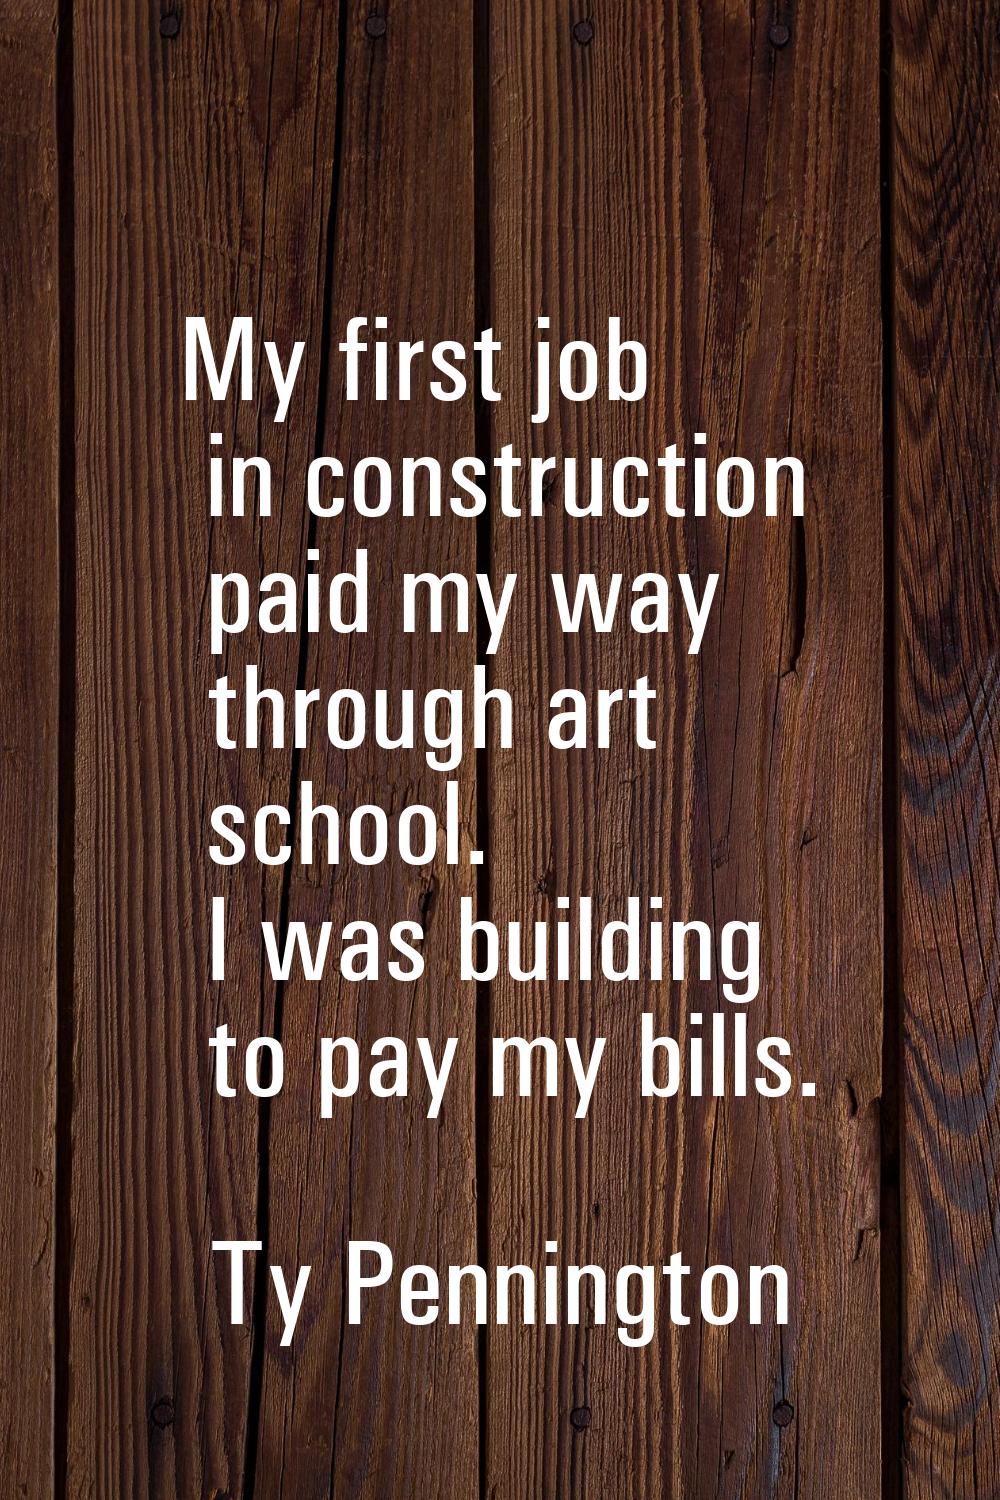 My first job in construction paid my way through art school. I was building to pay my bills.